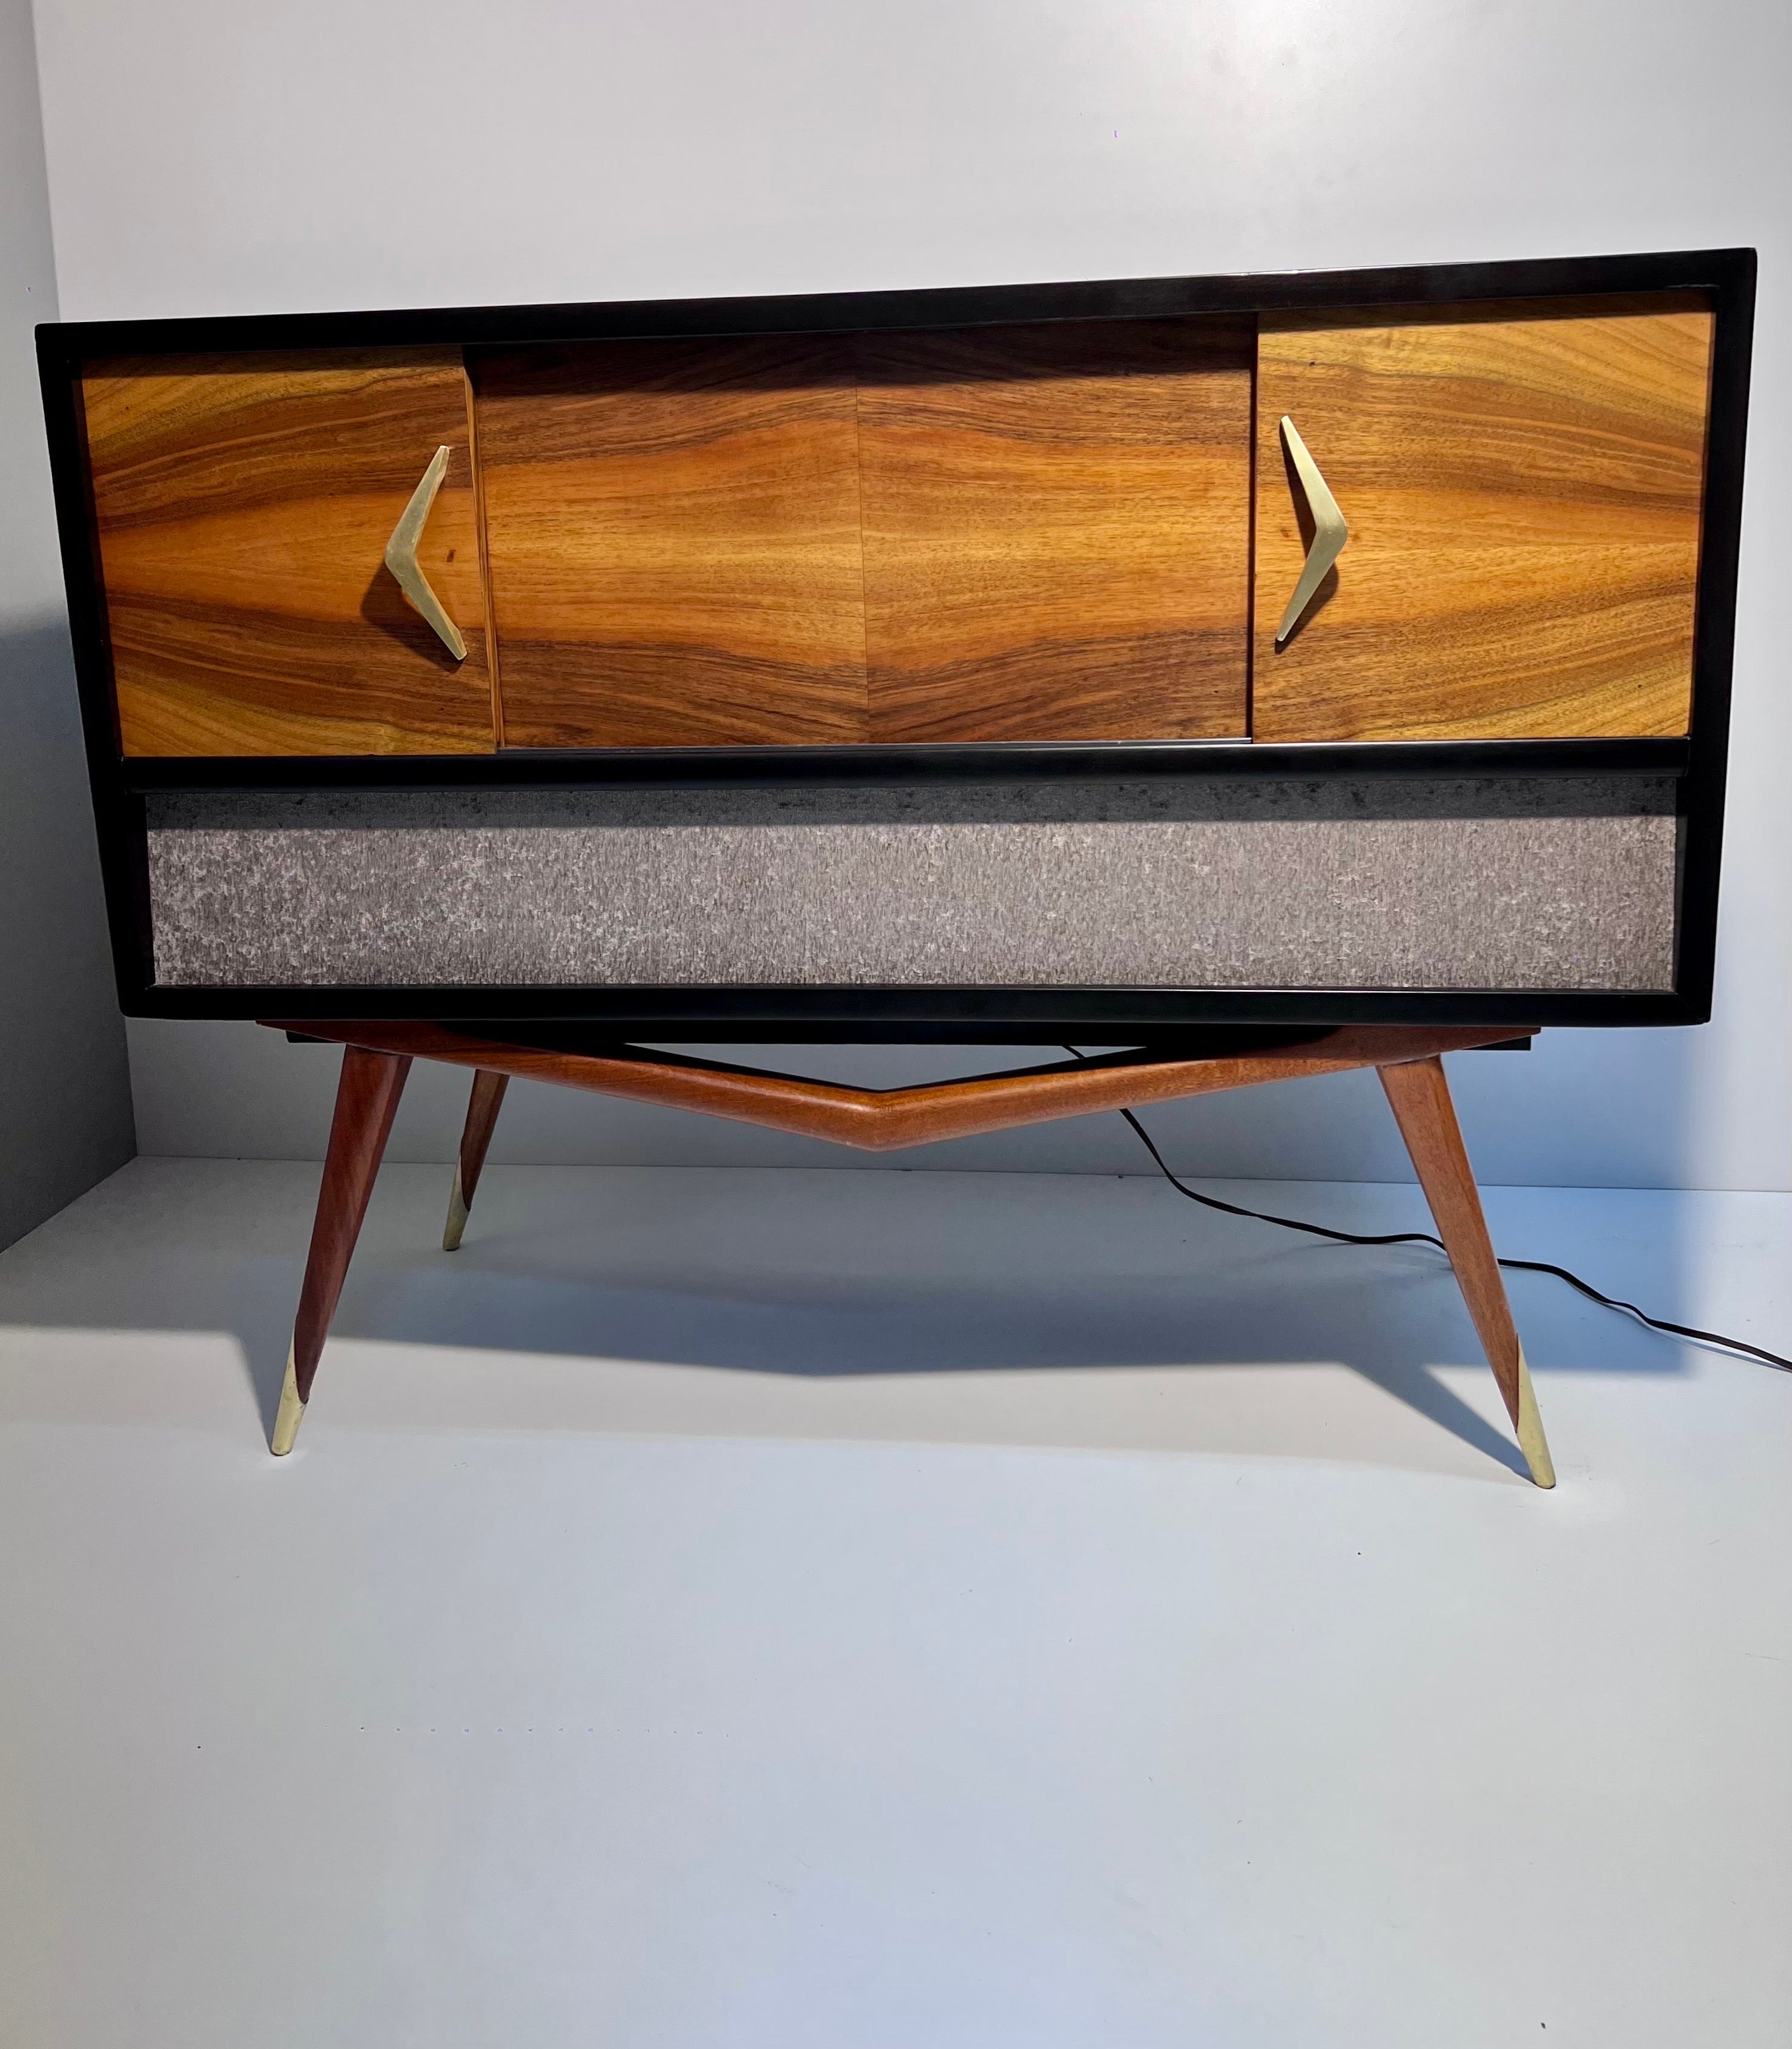 Spectacular midcentury console made in Mexico in the early 1960s, mahogany, elm and pine wood with brass details. We added new Bluetooth audio equipment as the original system we believe does not work. The entire exterior and interior was